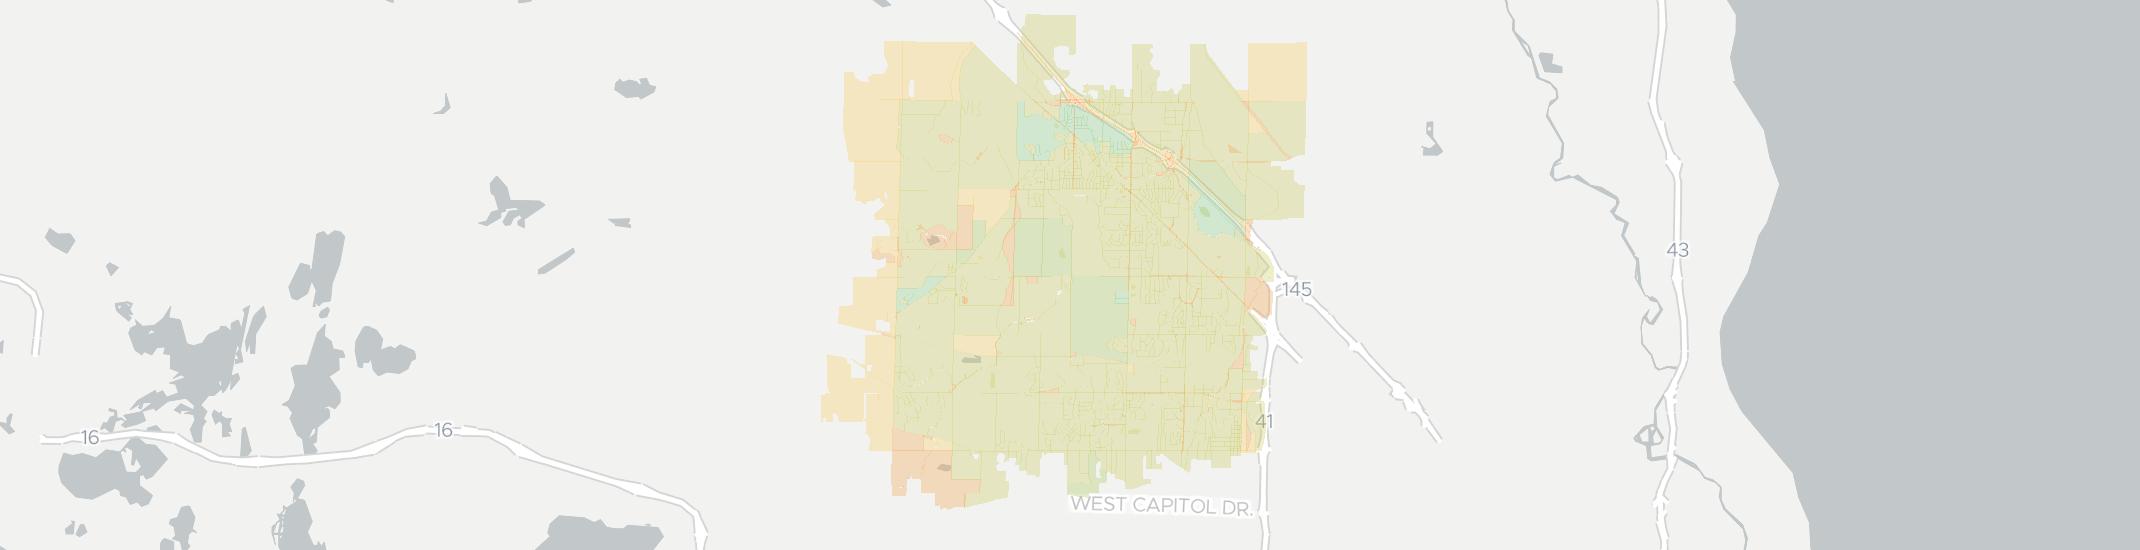 Menomonee Falls Internet Competition Map. Click for interactive map.